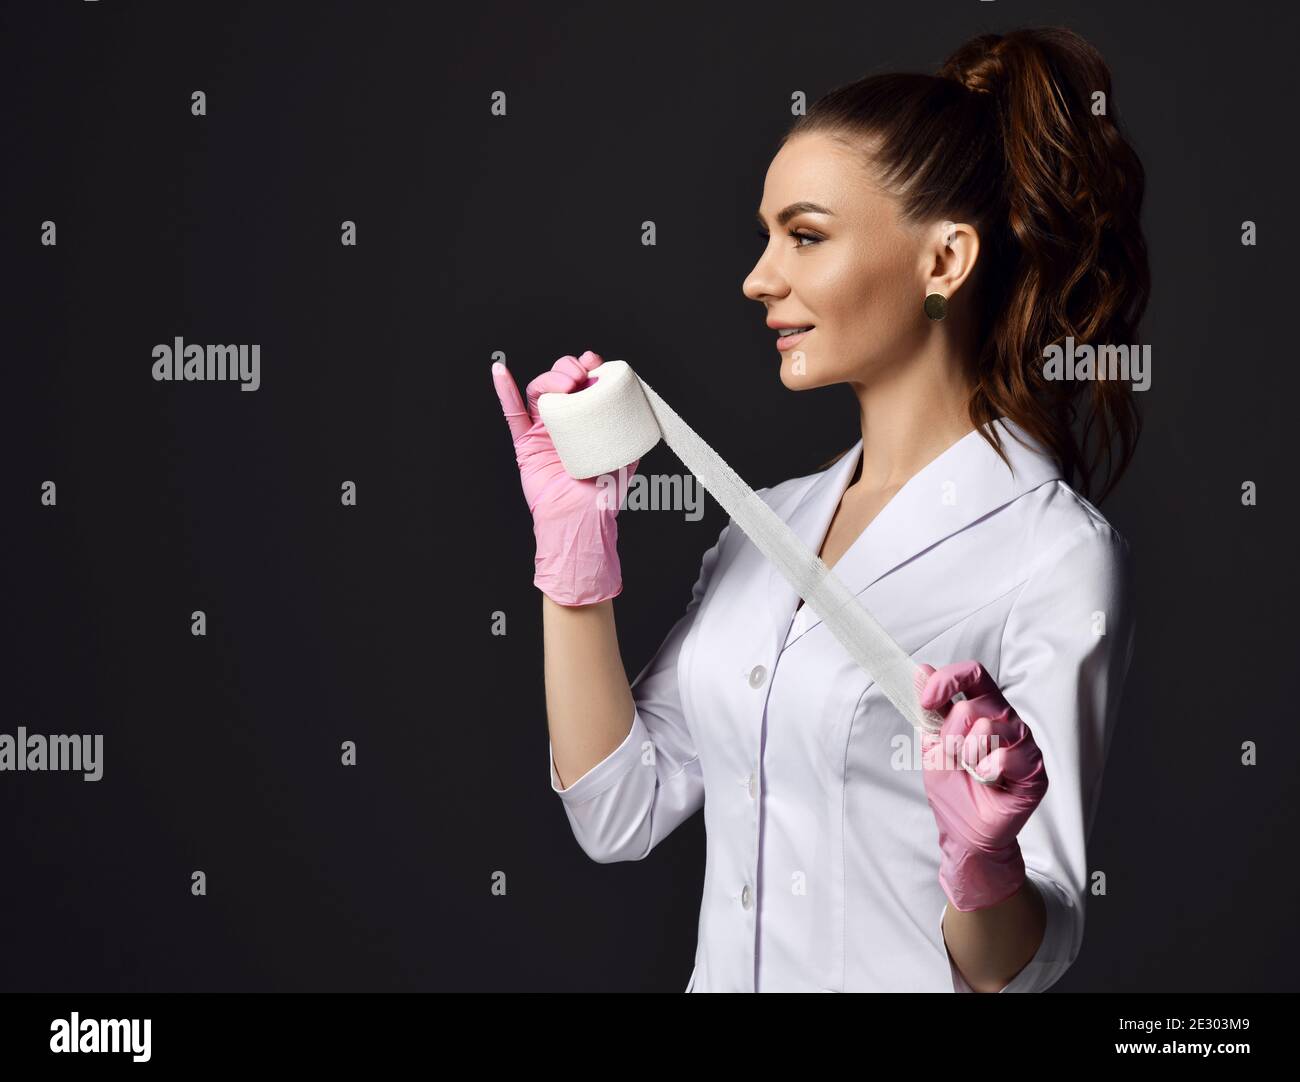 Profile of pretty woman doctor gynecologist or nurse in pink latex gloves and uniform stands holding medical bandage Stock Photo